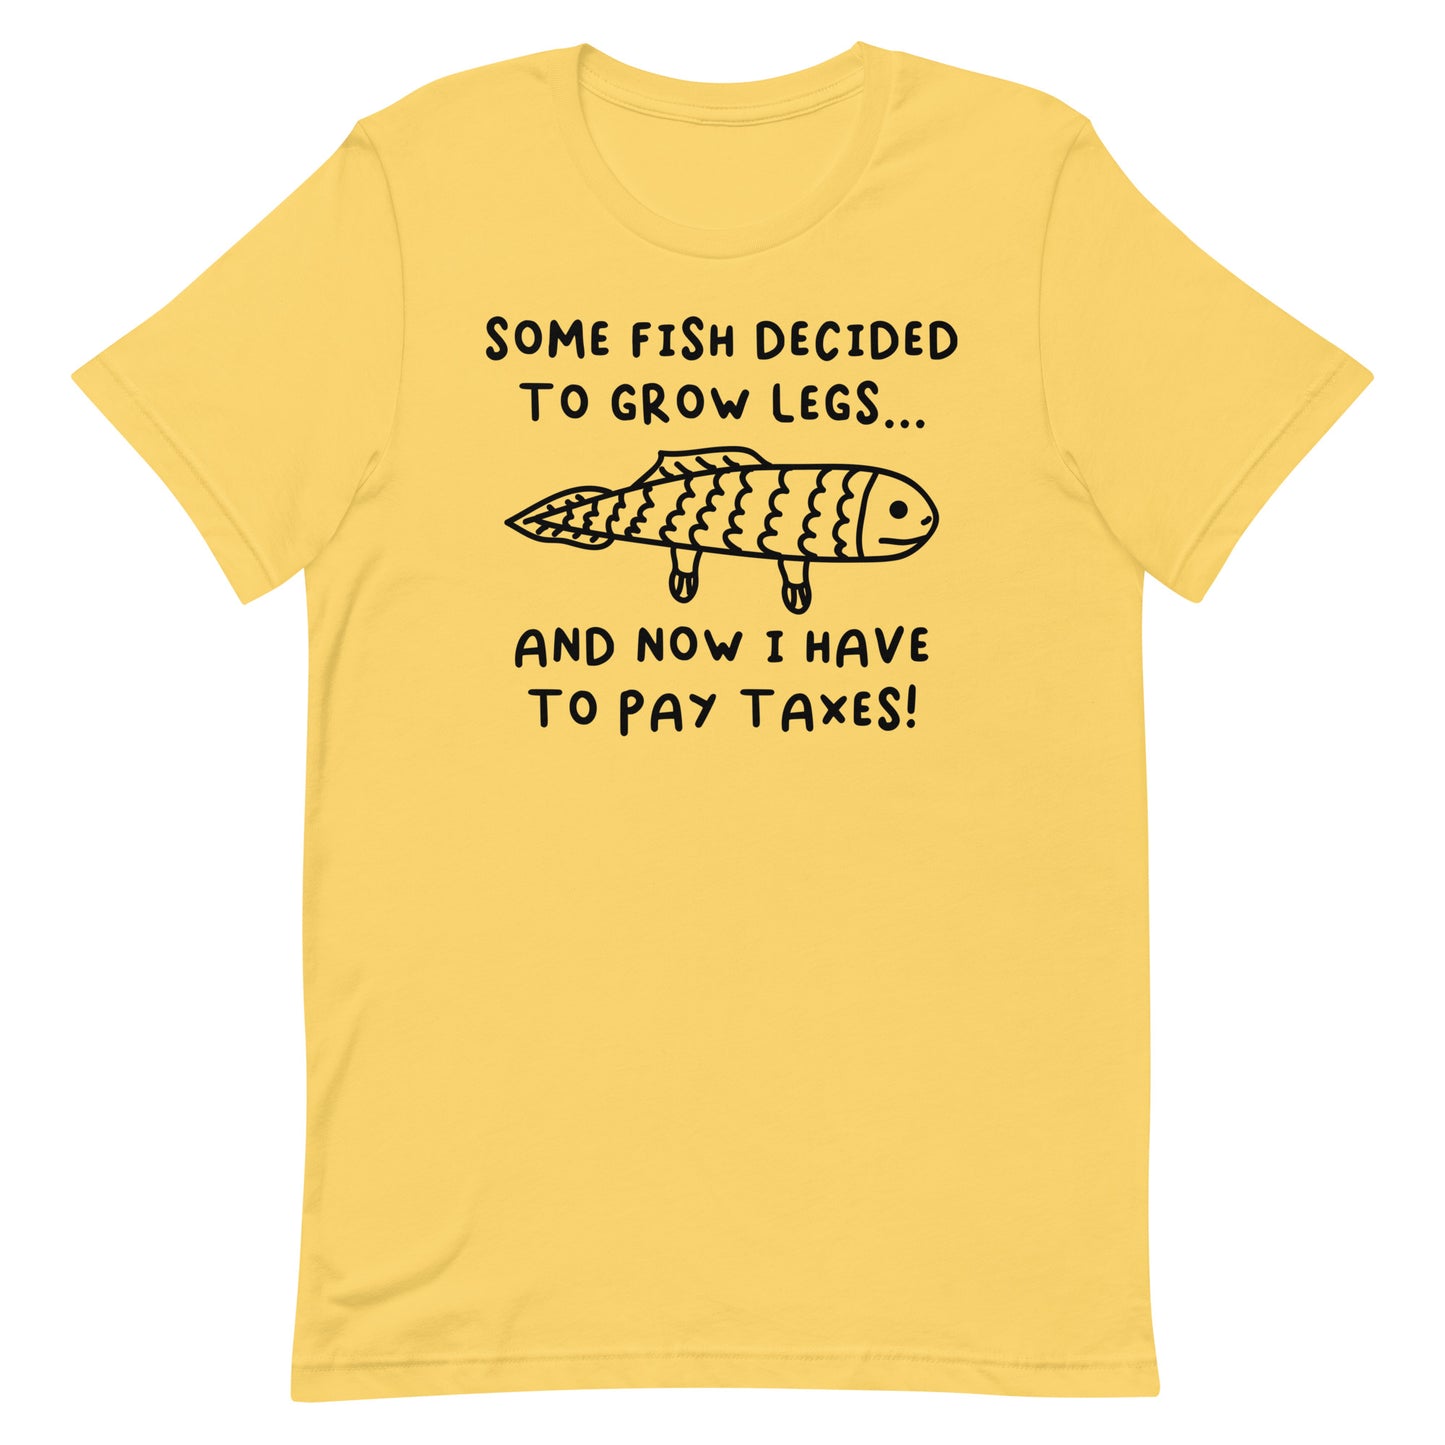 Some Fish Decided to Grow Legs (Taxes) Unisex t-shirt